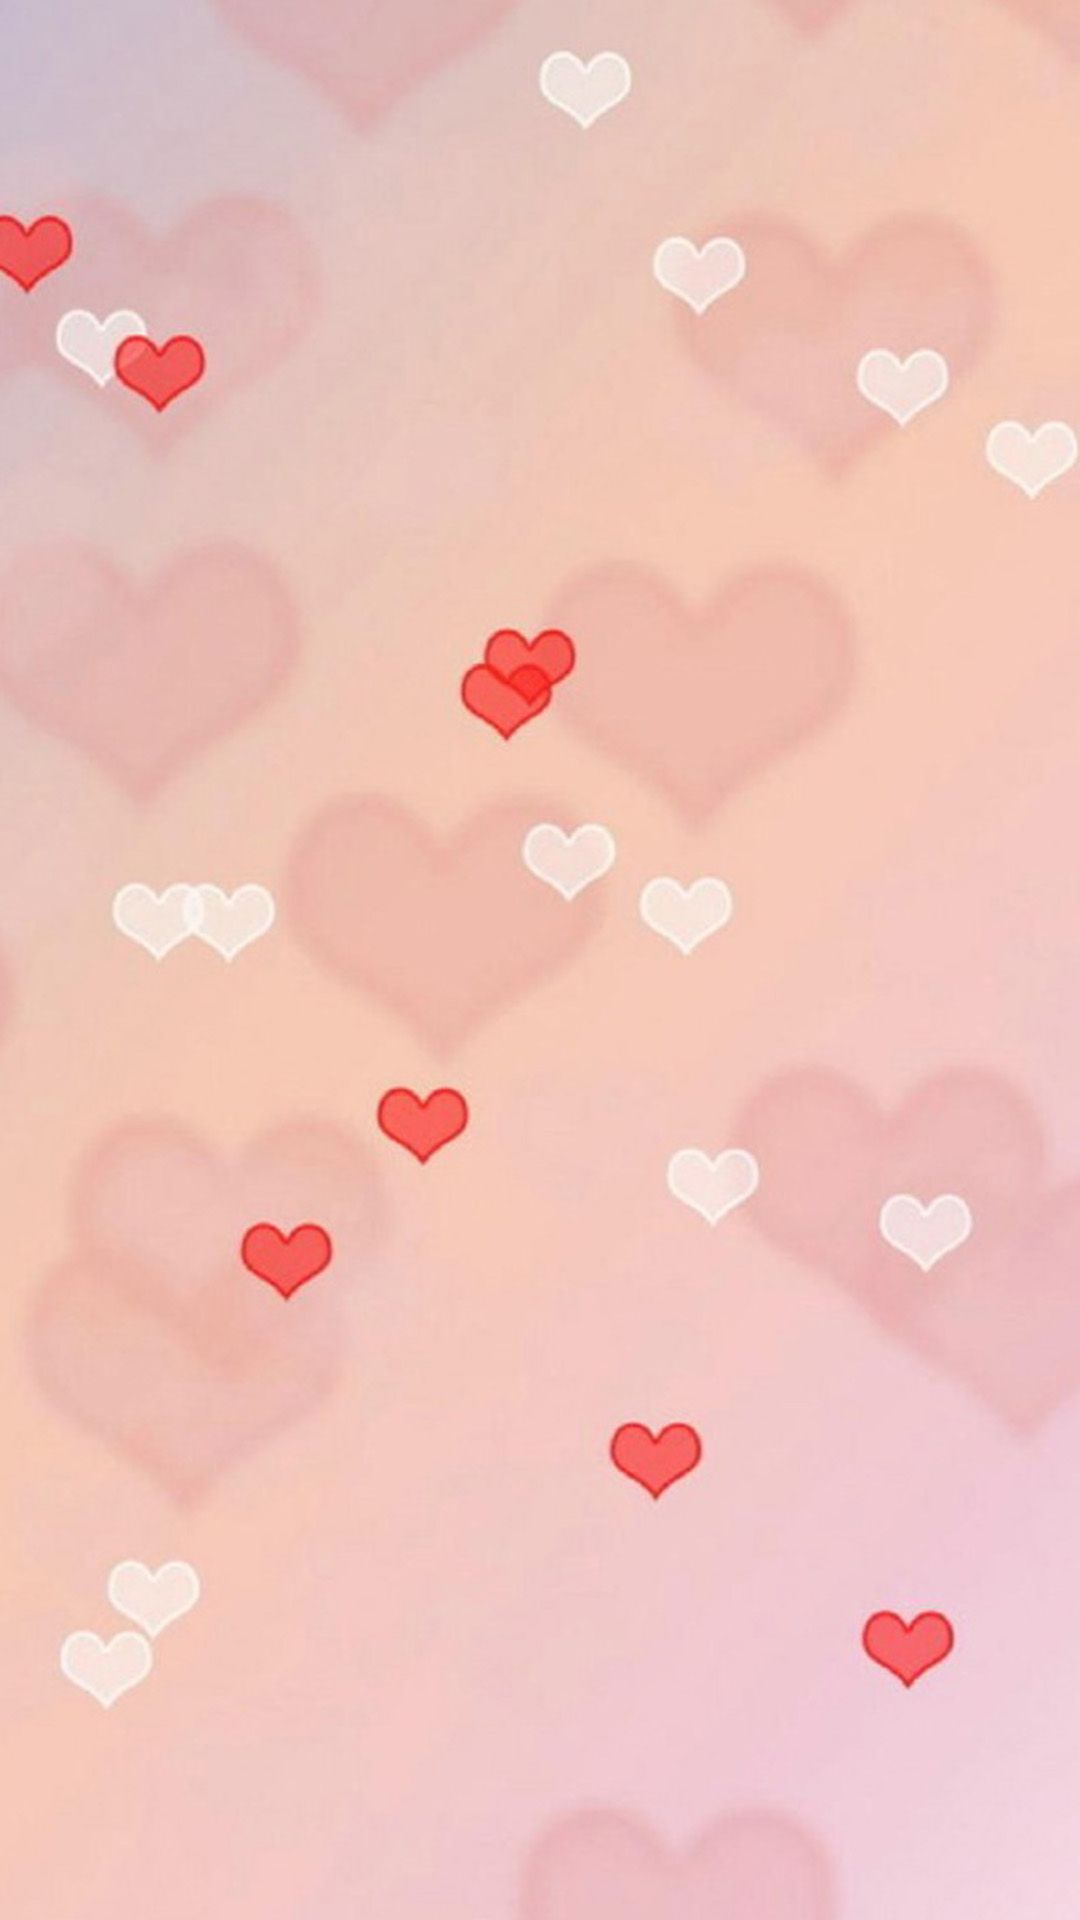 Love Hearts Android Wallpaper - Love Pink Iphone 6 - HD Wallpaper 